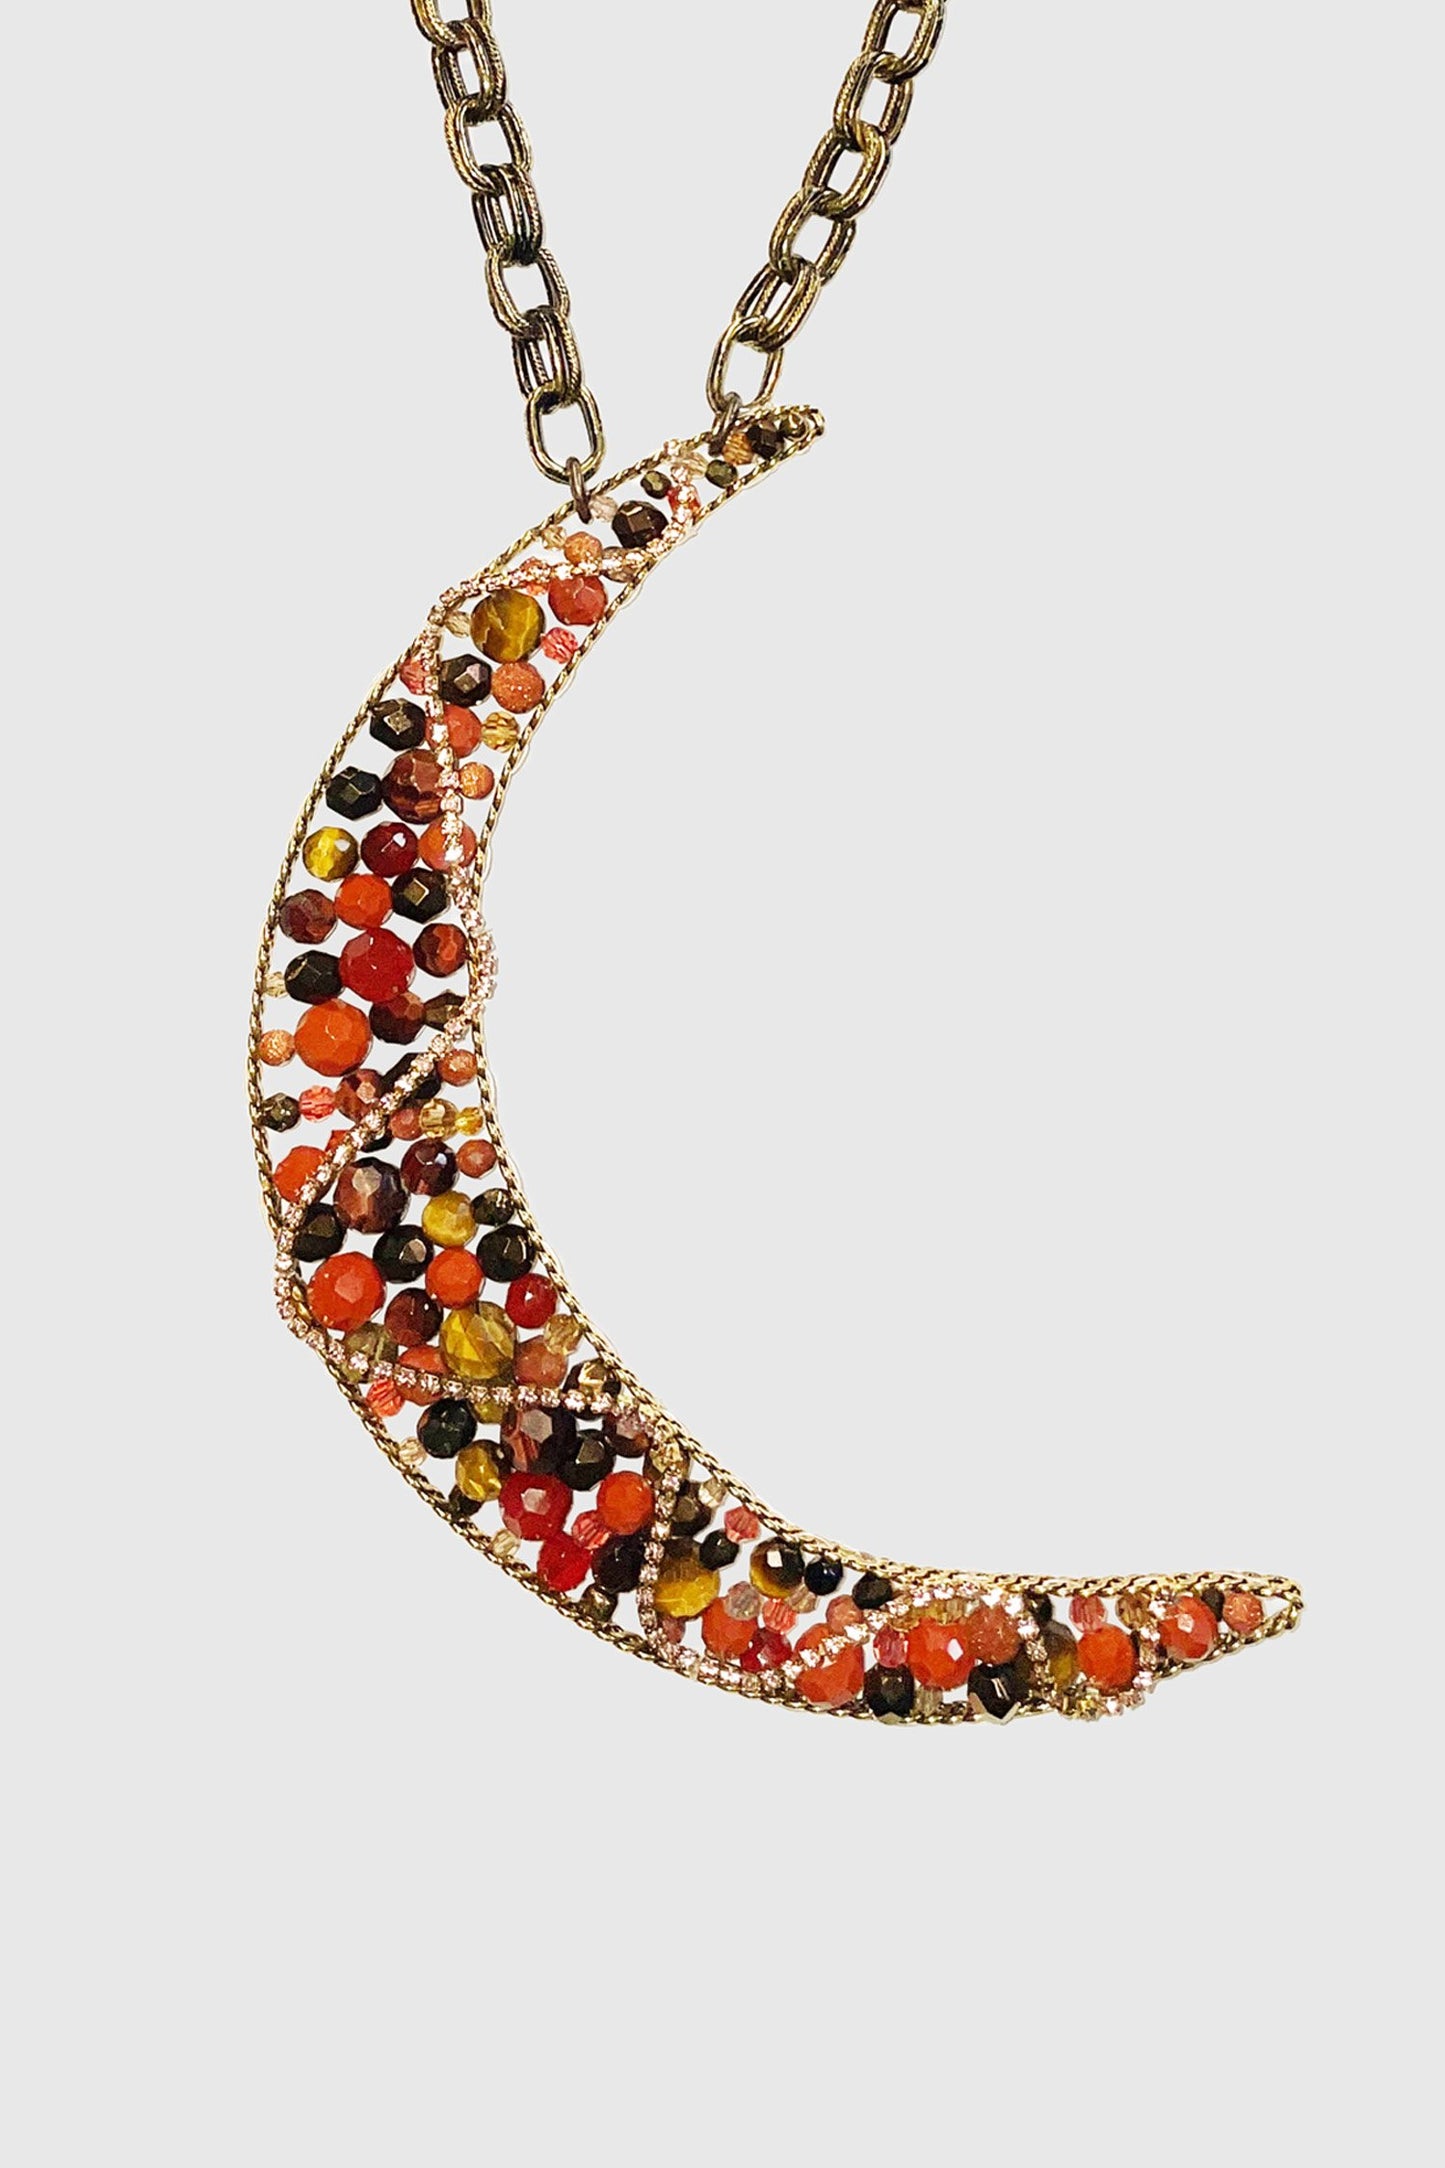 Dandy Girl Moon Necklace, a croissant noon with colored gems and a zigzag golden chain , overall color is orange